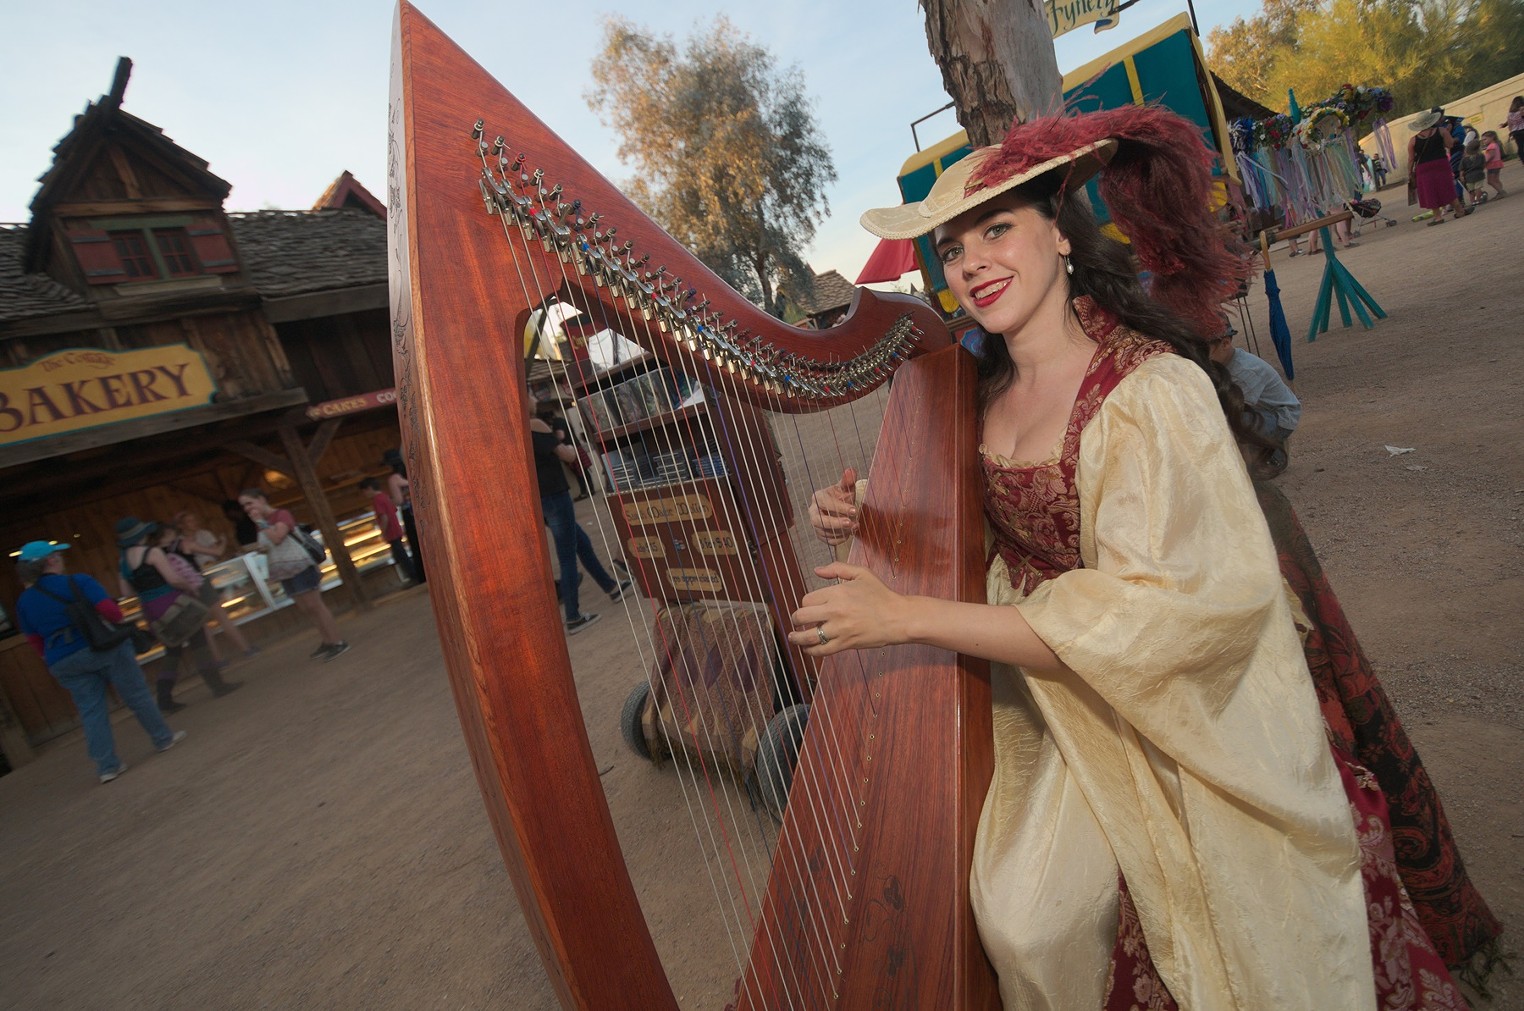 A Day of Medieval Merriment at the Arizona Renaissance Festival